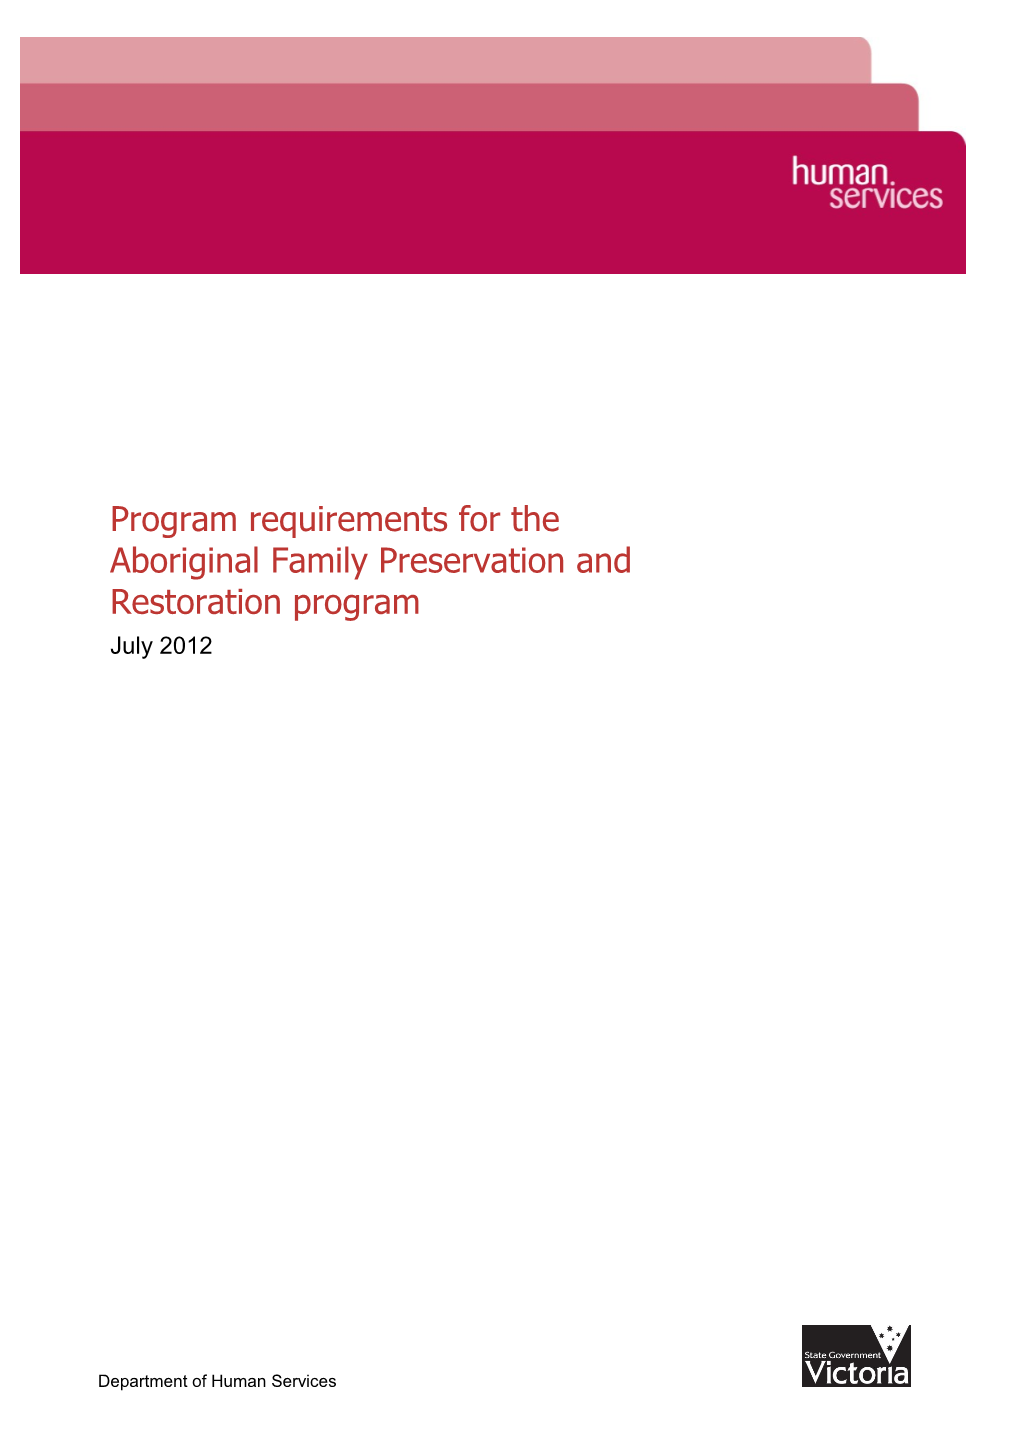 Program Requirements for the Aboriginal Family Preservation and Restoration Program